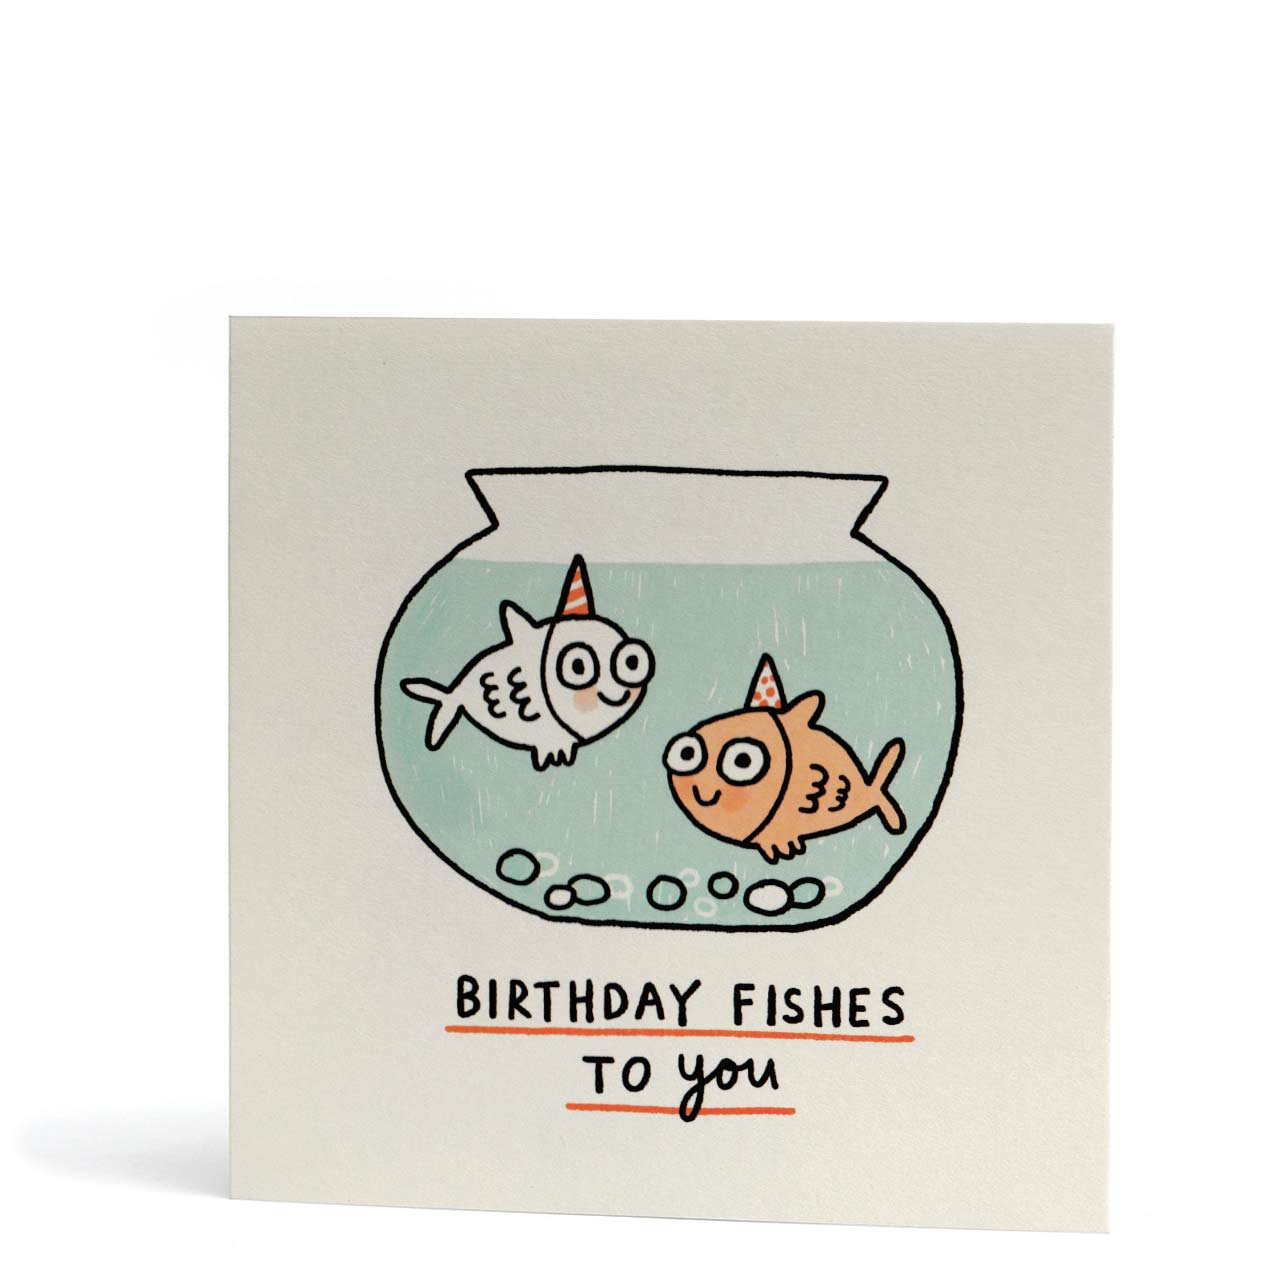 Birthday Fishes to You Greeting Card